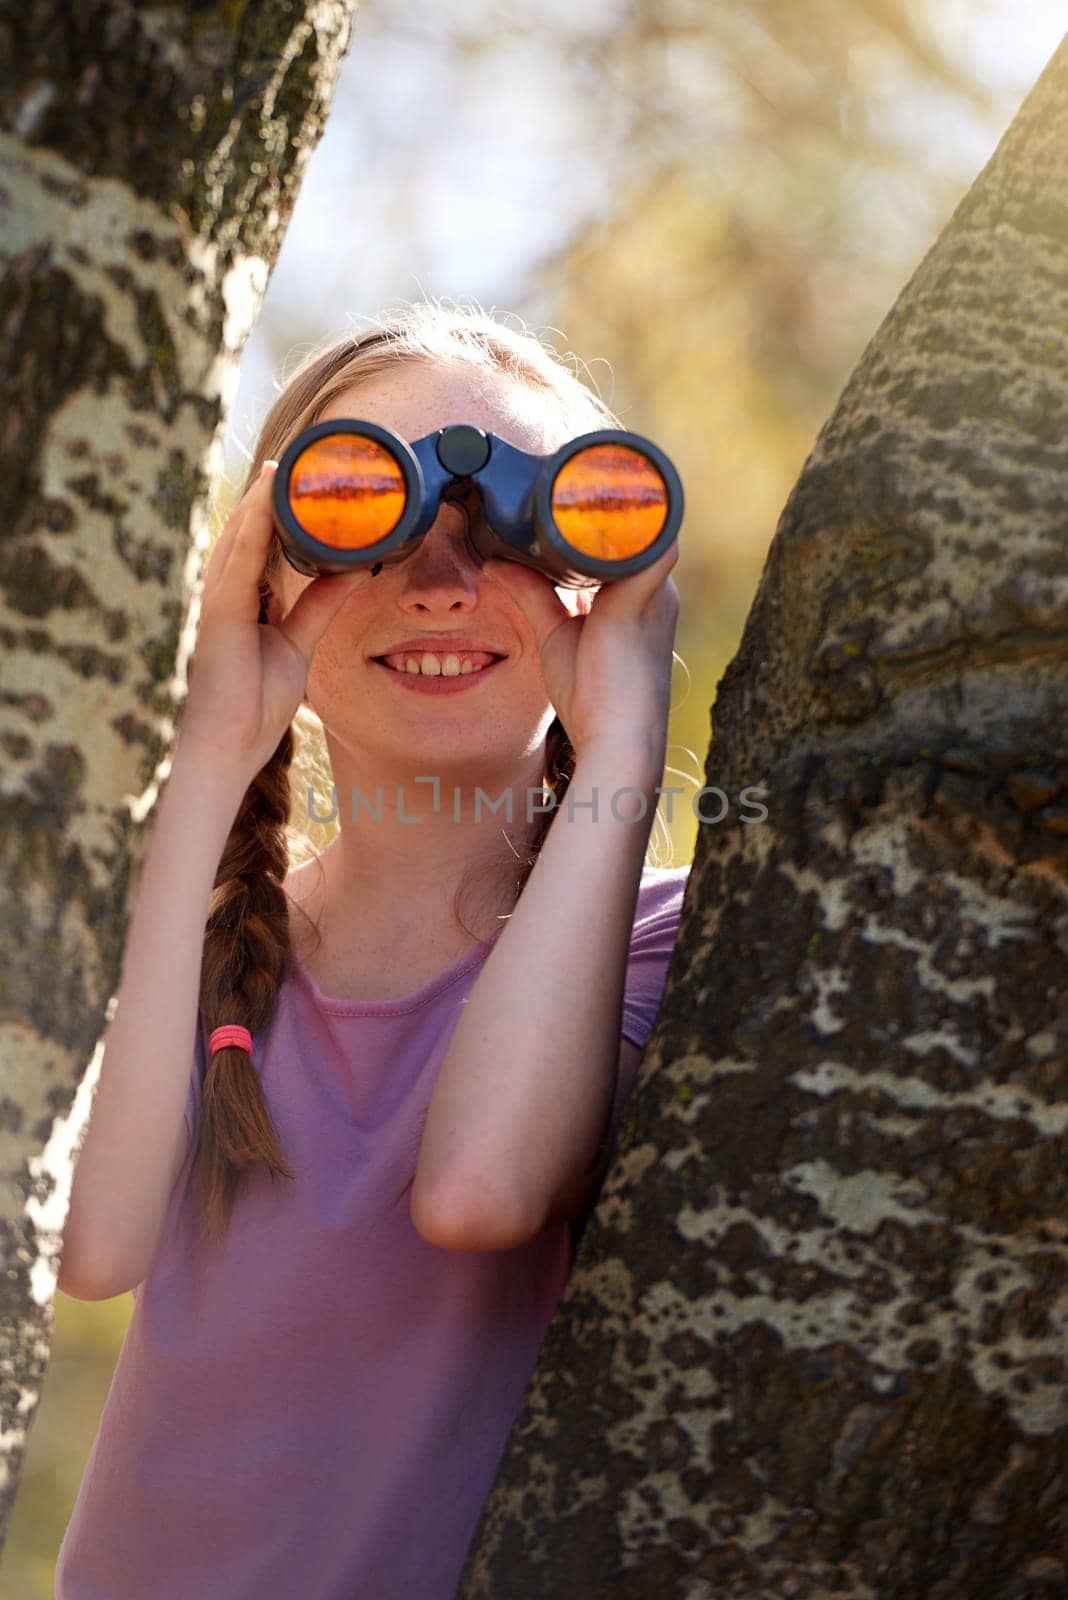 Tree, girl and binoculars for safari, search and looking for animals on travel holiday. Smile, fun and seek for bird watching or wildlife in nature, happy young child and scenery or view in Kenya by YuriArcurs